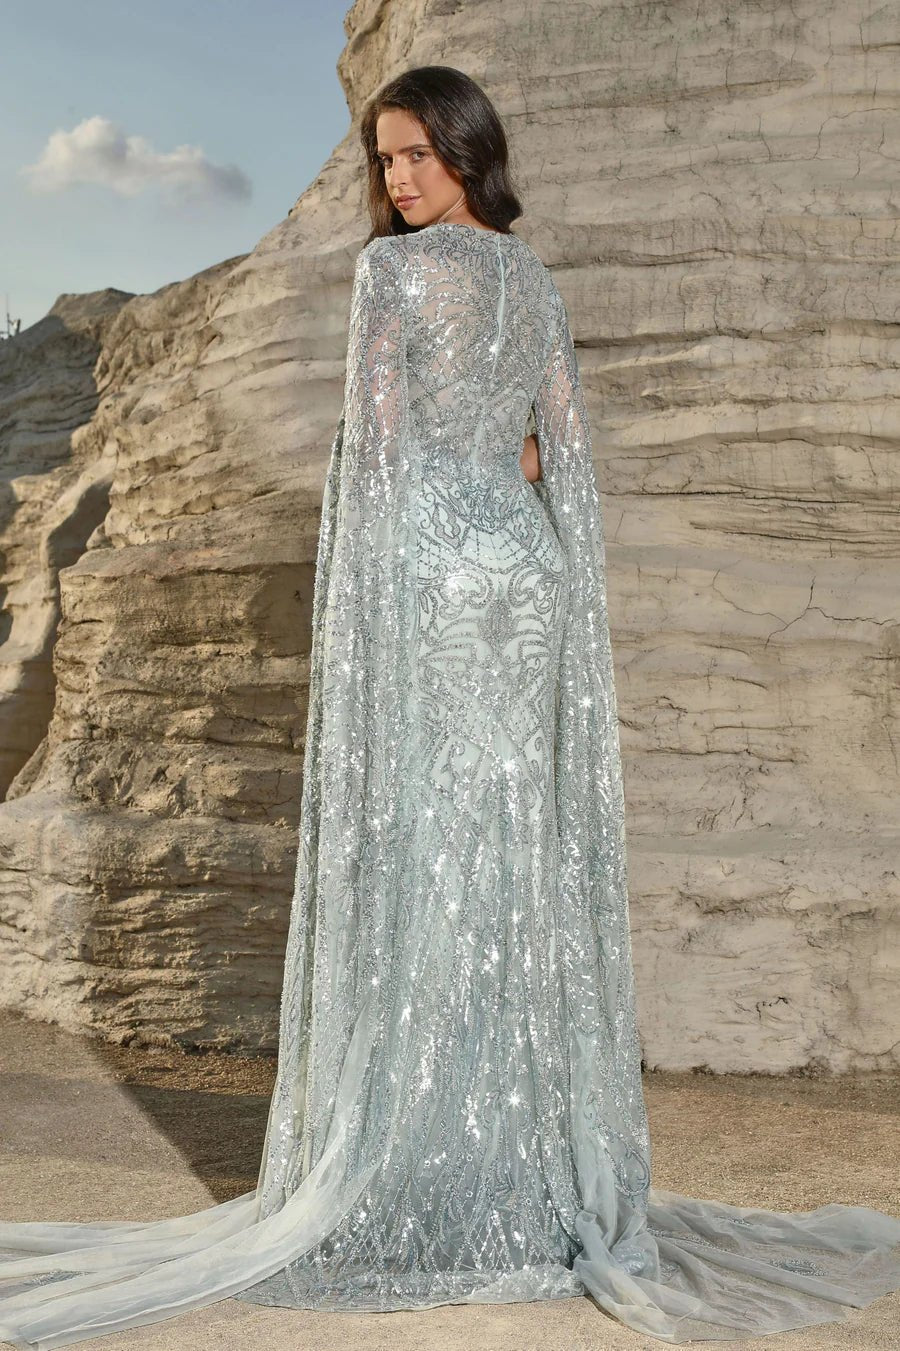 Elegant Champagne Sequin Gown with Cape Sleeves - Designer Sequin Dress and Pretty Sequin Dress Plus Size - WonderlandByLilian